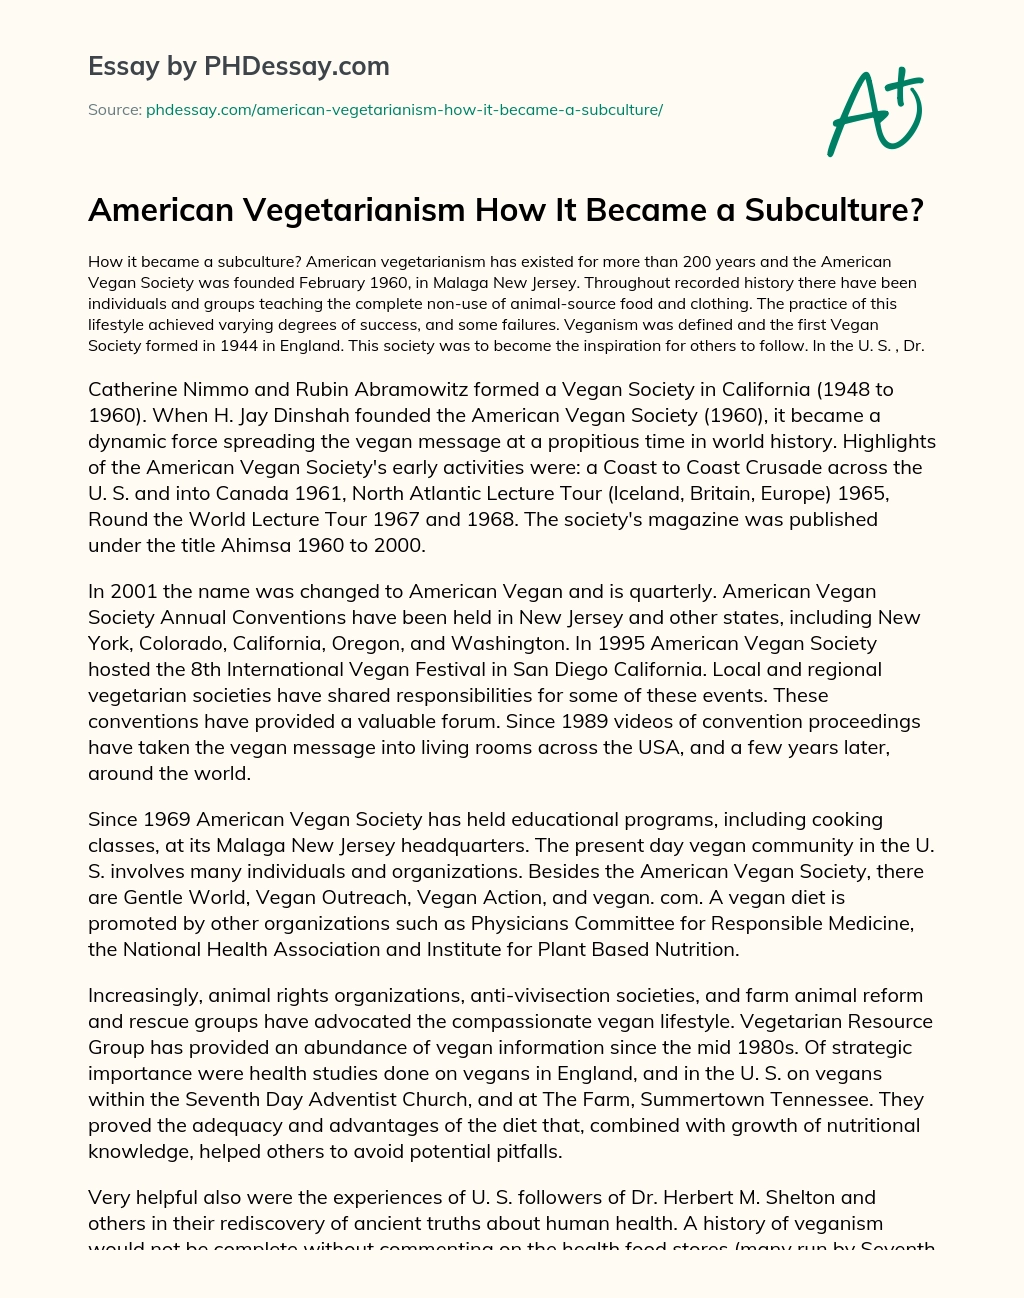 American Vegetarianism How It Became a Subculture? essay